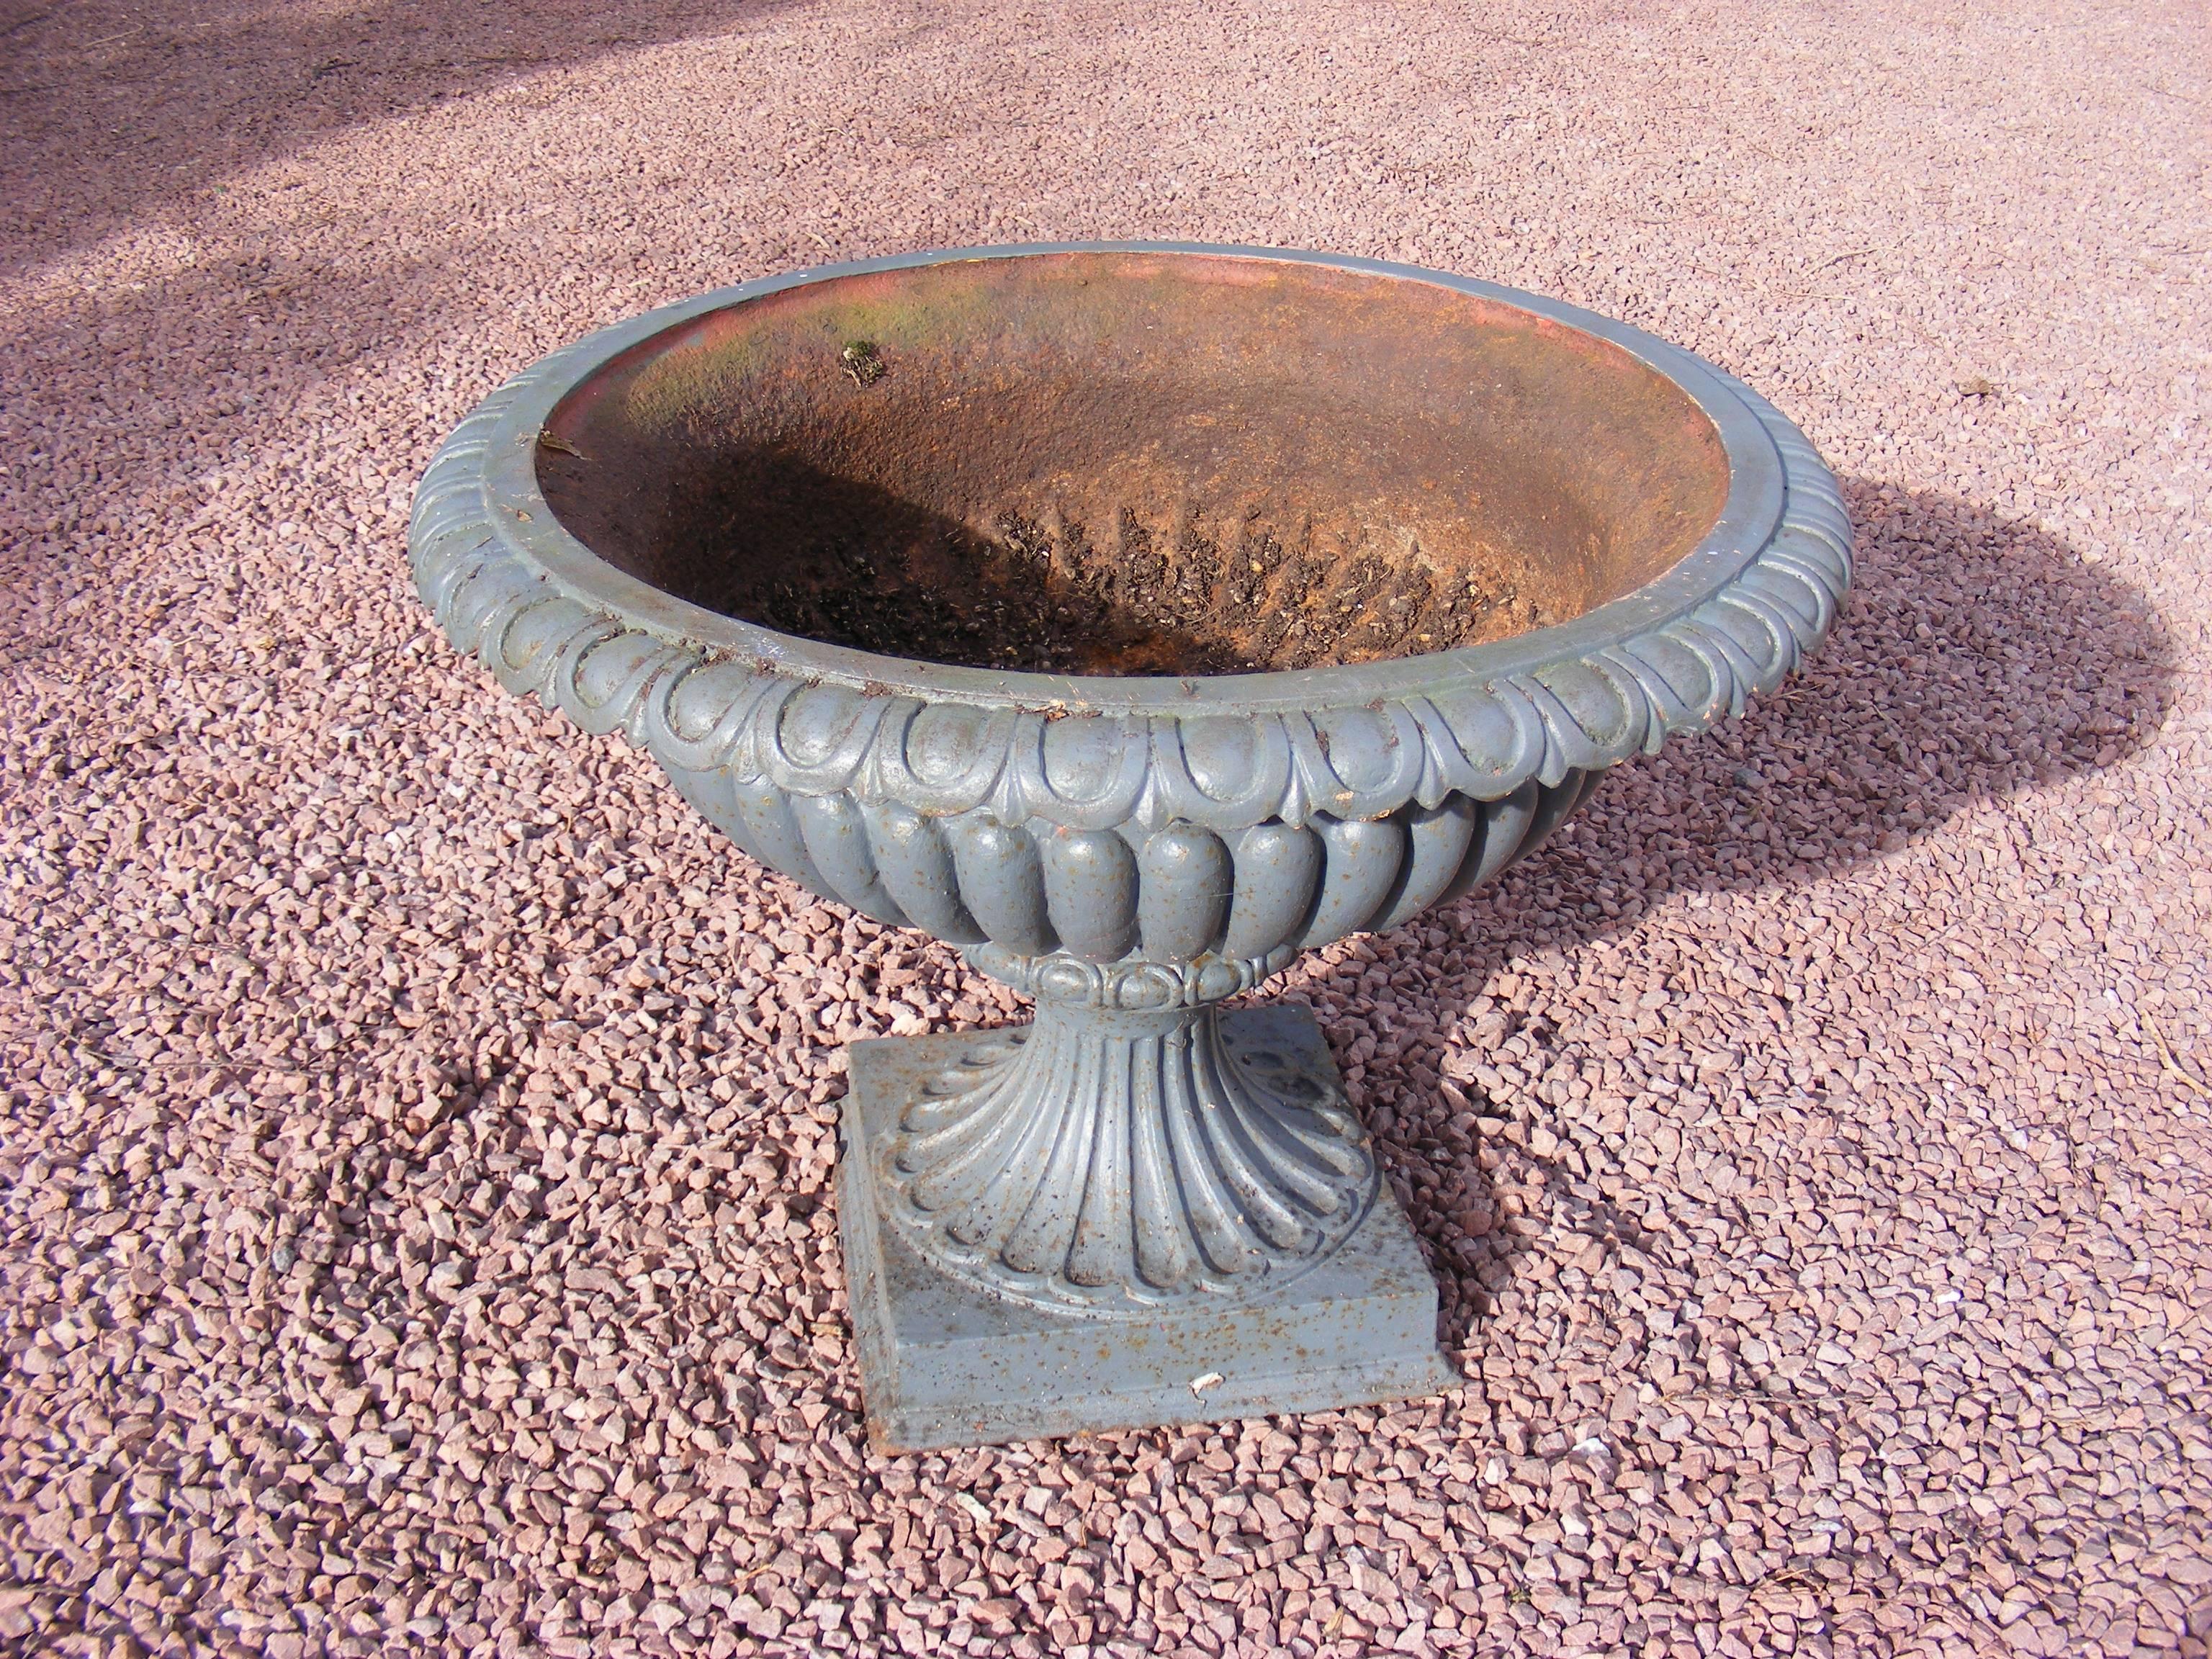 This classical George III jardinière urn of the Adam period will make a stunning feature in any garden or summer house. Indeed, we have seen a number of these urns converted for use as water fountains.

Made from cast iron this urn has been